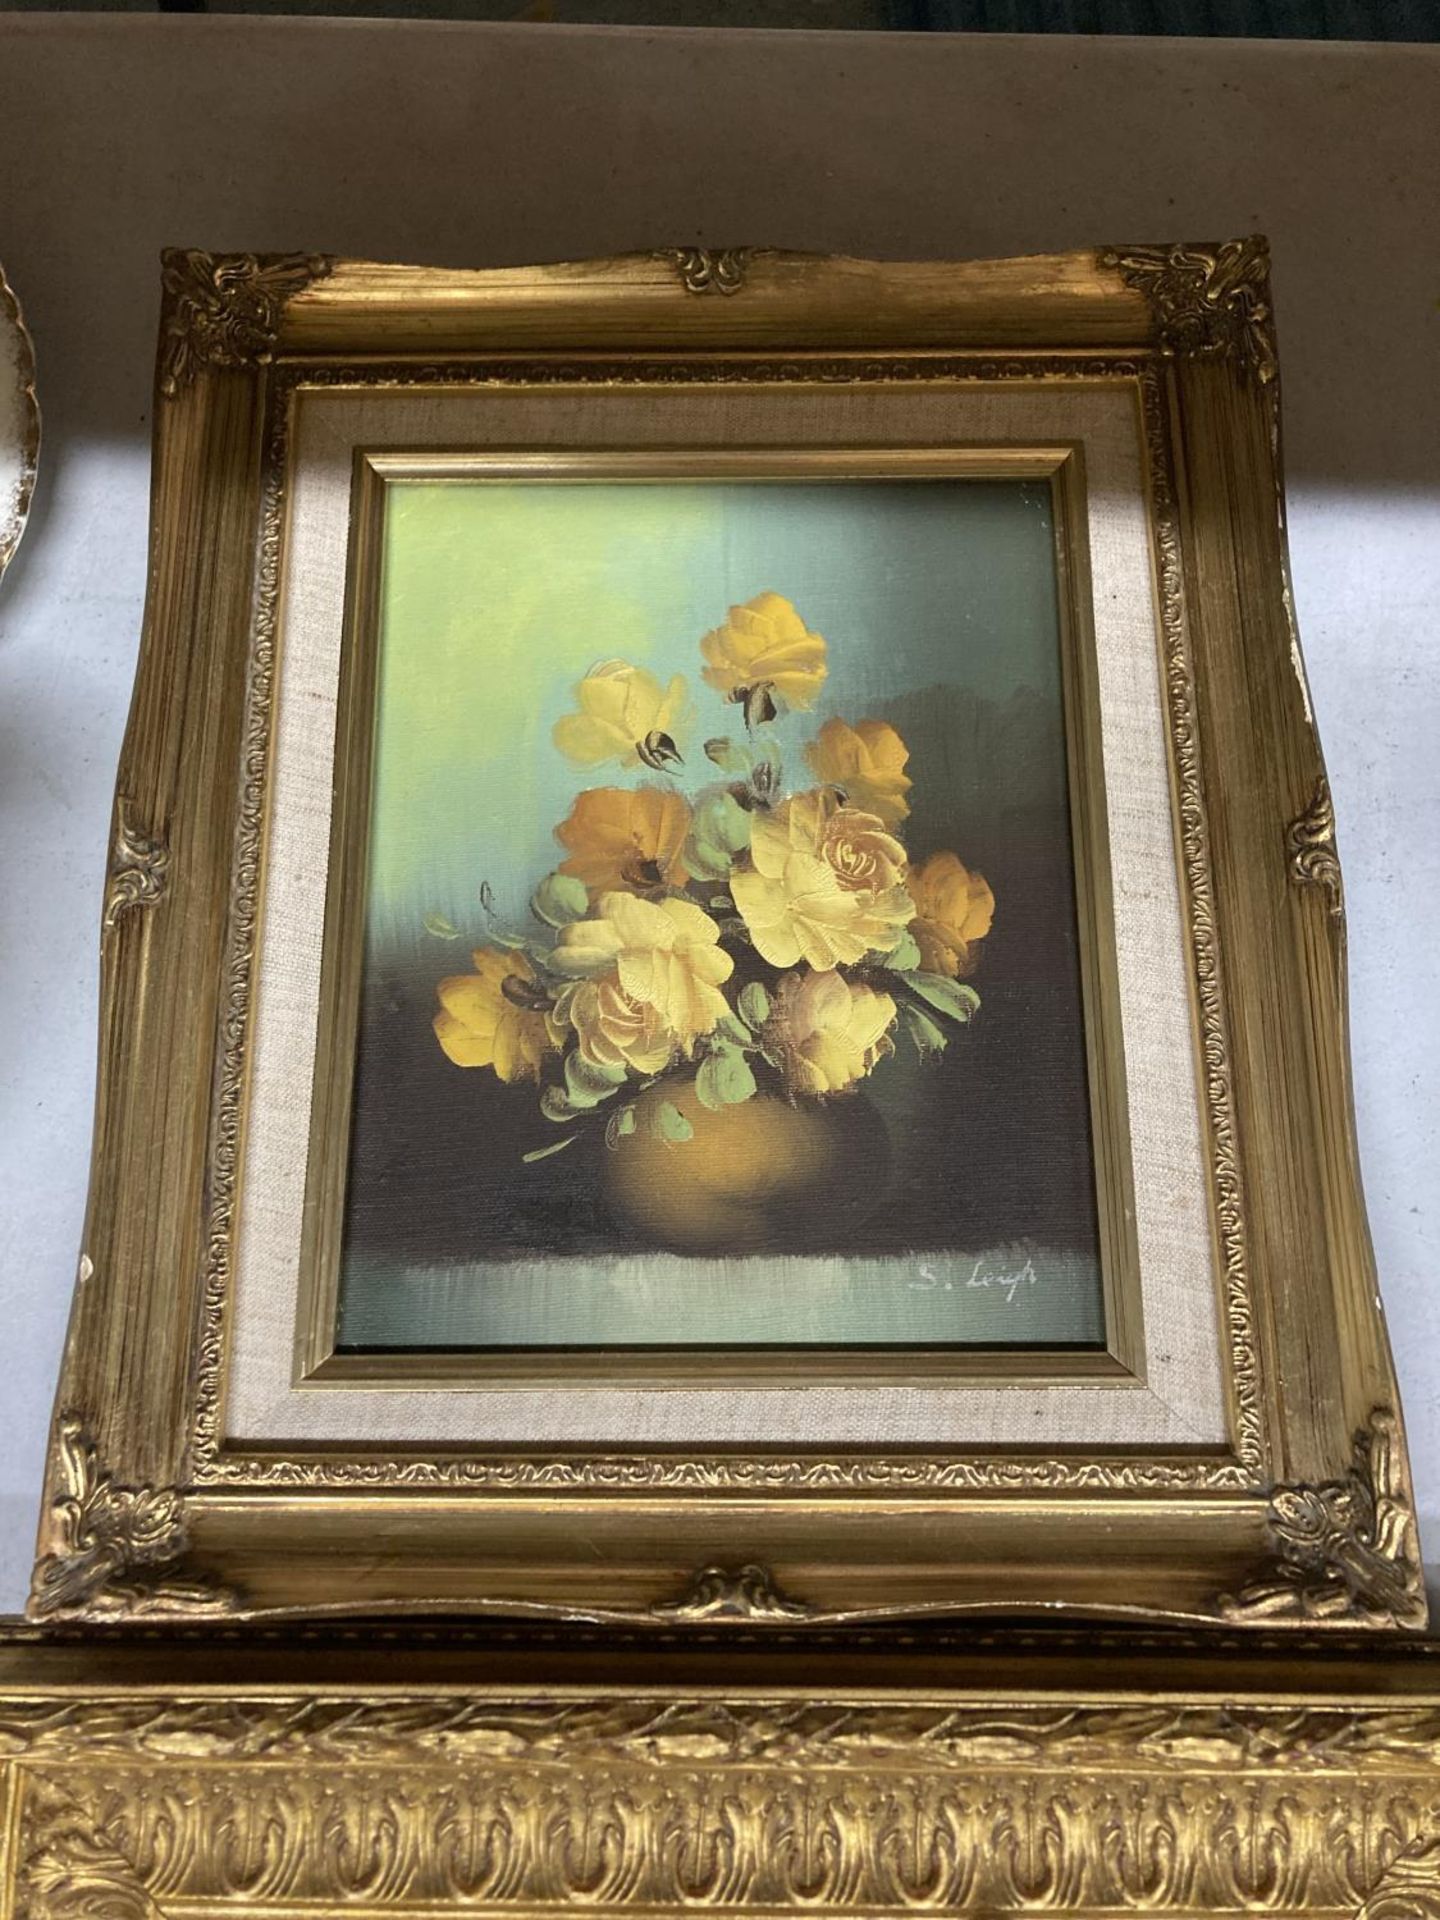 A 19TH CENTURY GILT FRAMED STILL LIFE OIL PAINTING BY EDWARD GEORGE HANDEL LUCAS, SIGNED E.G.H LUCAS - Image 2 of 6